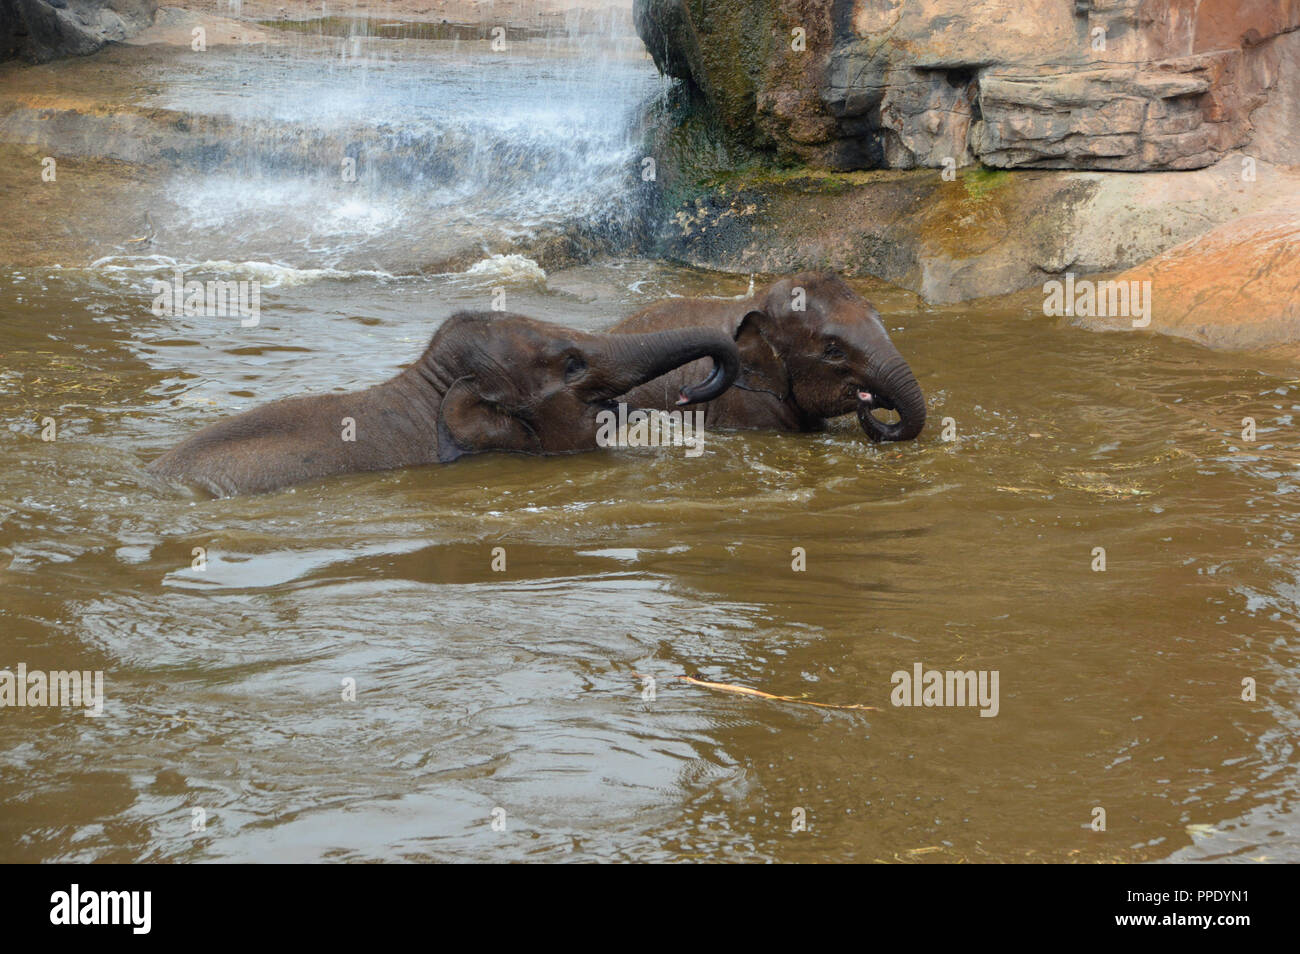 Two Young Asian Elephants (Elephas maximus) Playing in Pool near a Waterfall in its Enclosure at Chester Zoo. Stock Photo